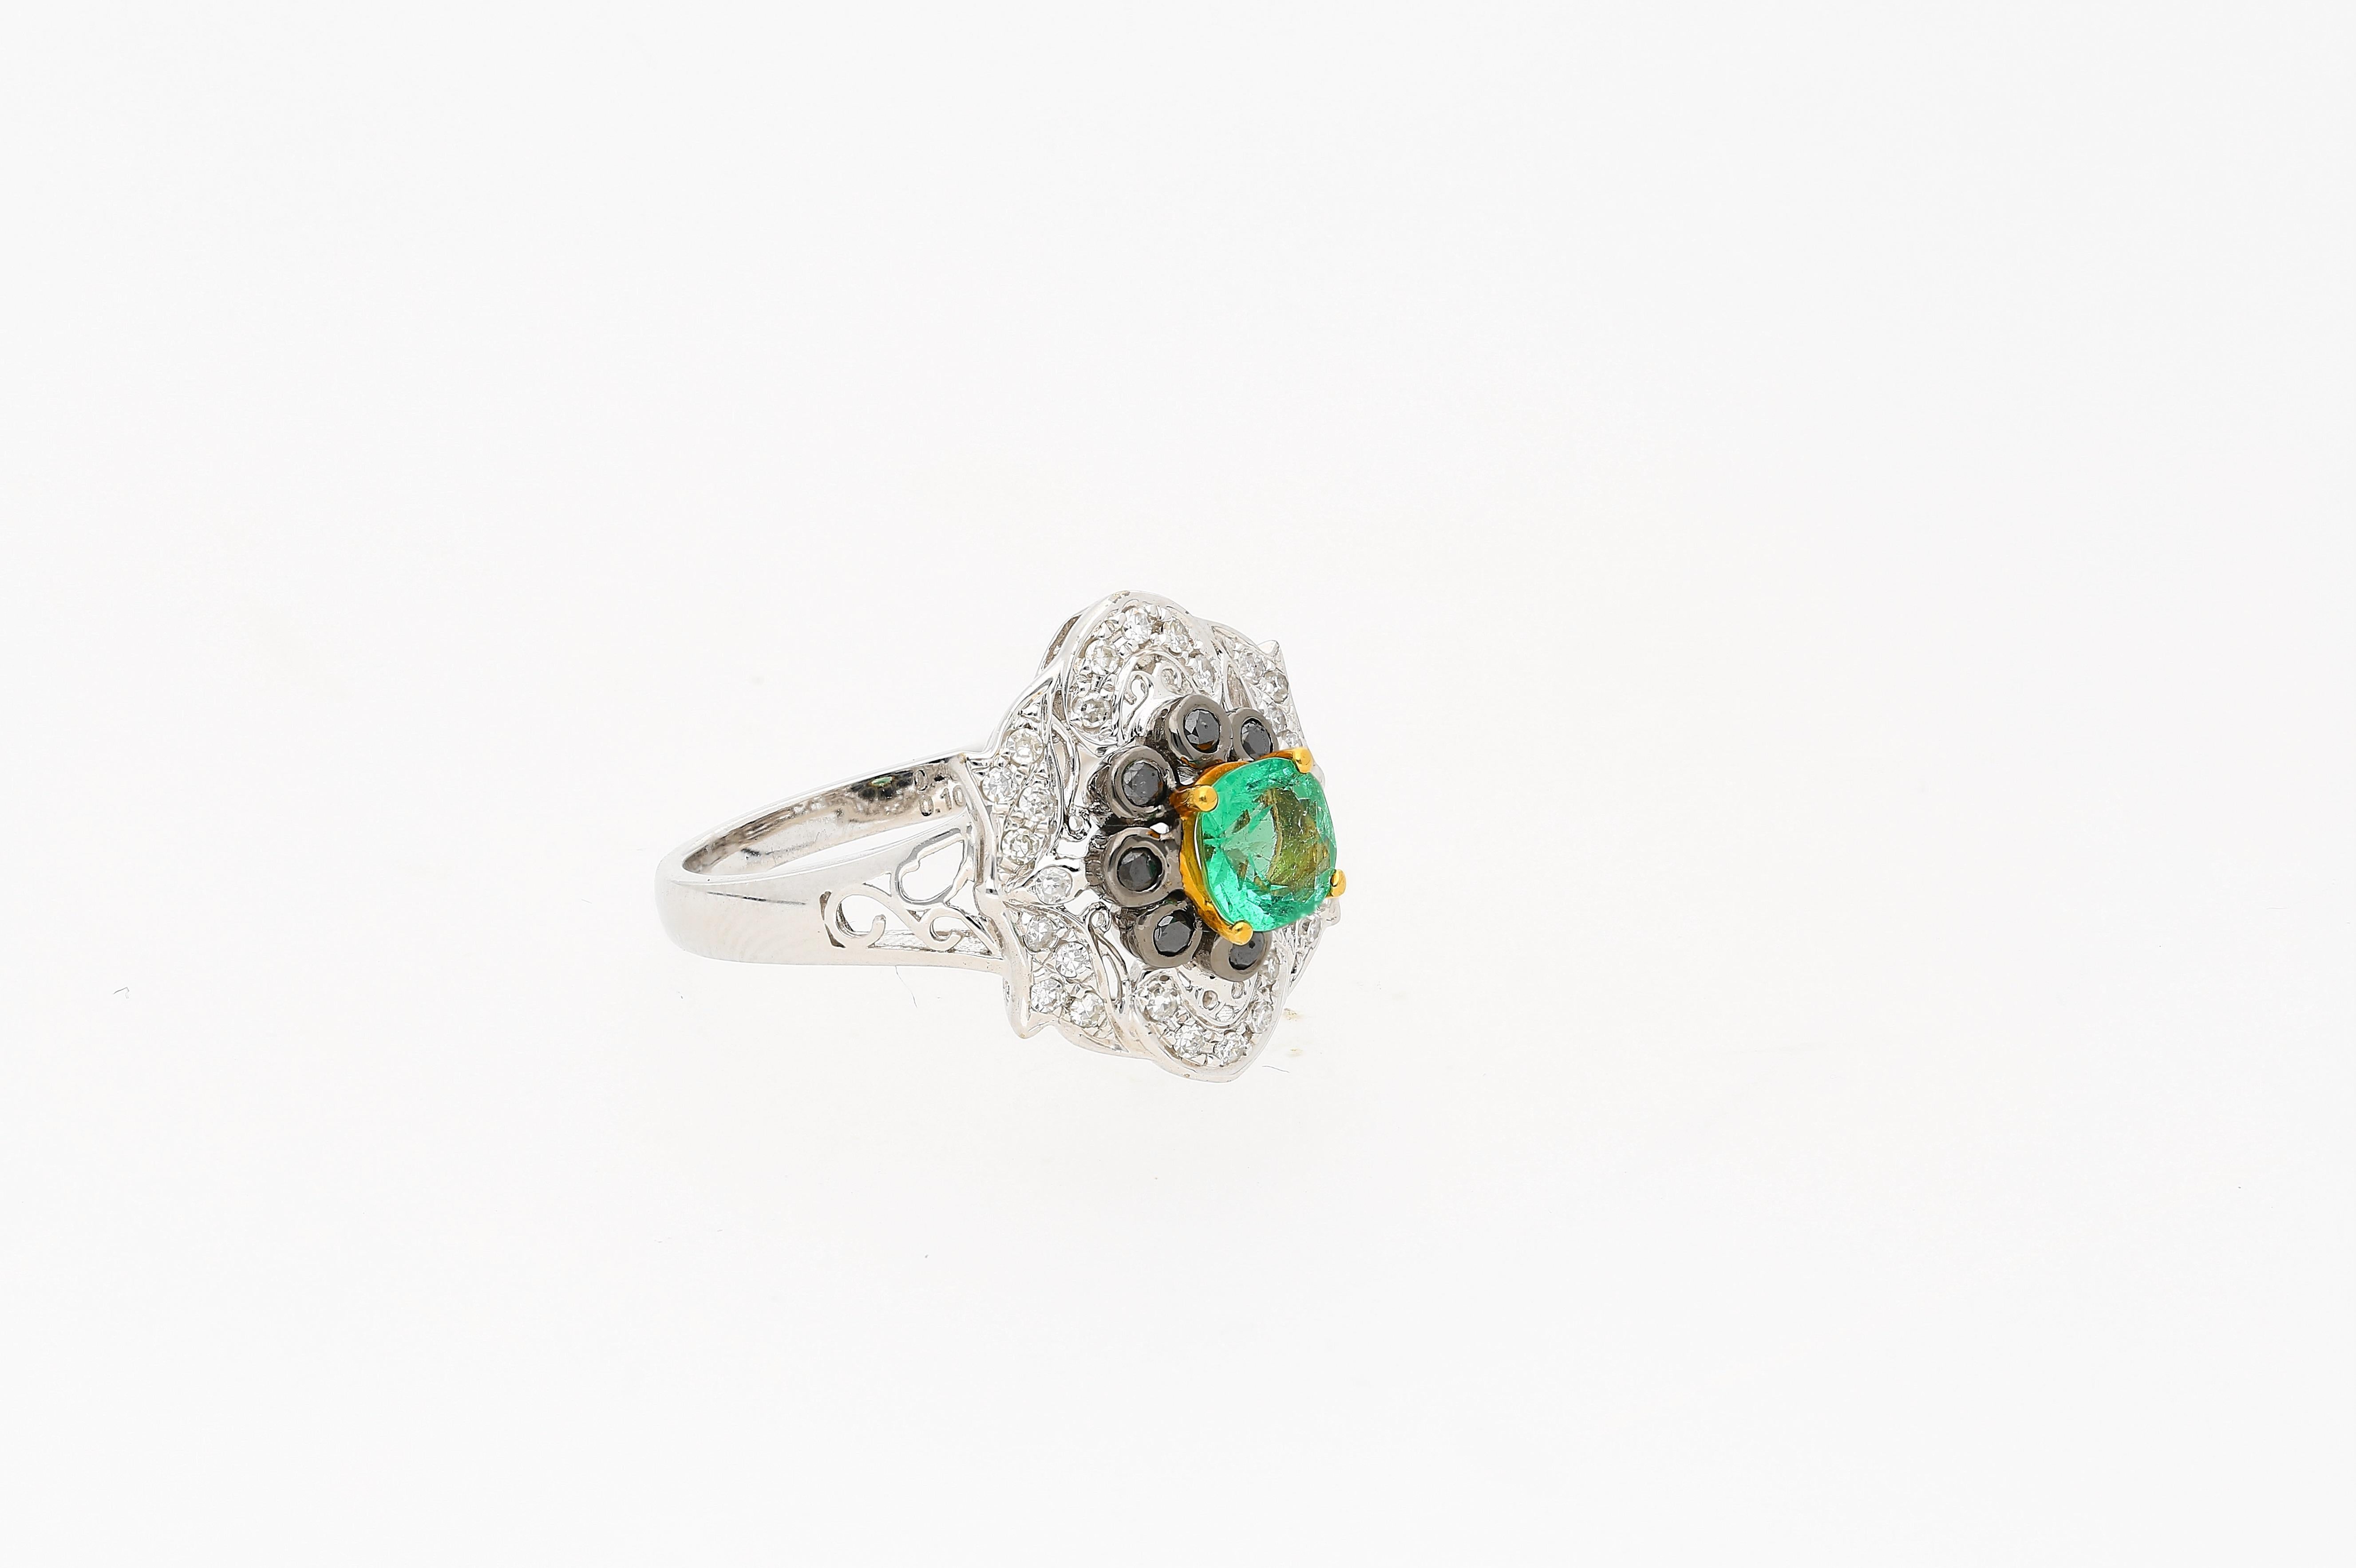 Natural cushion-cut Emerald of 0.48 carats. Center stone Emerald is surrounded by 8 black diamonds of 0.10 carats (total), and 28 round-cut white diamonds of 0.16 carats total. A unique ring with art deco inspirations. 

✔ Gold Karat: 14K 
✔ Emerald